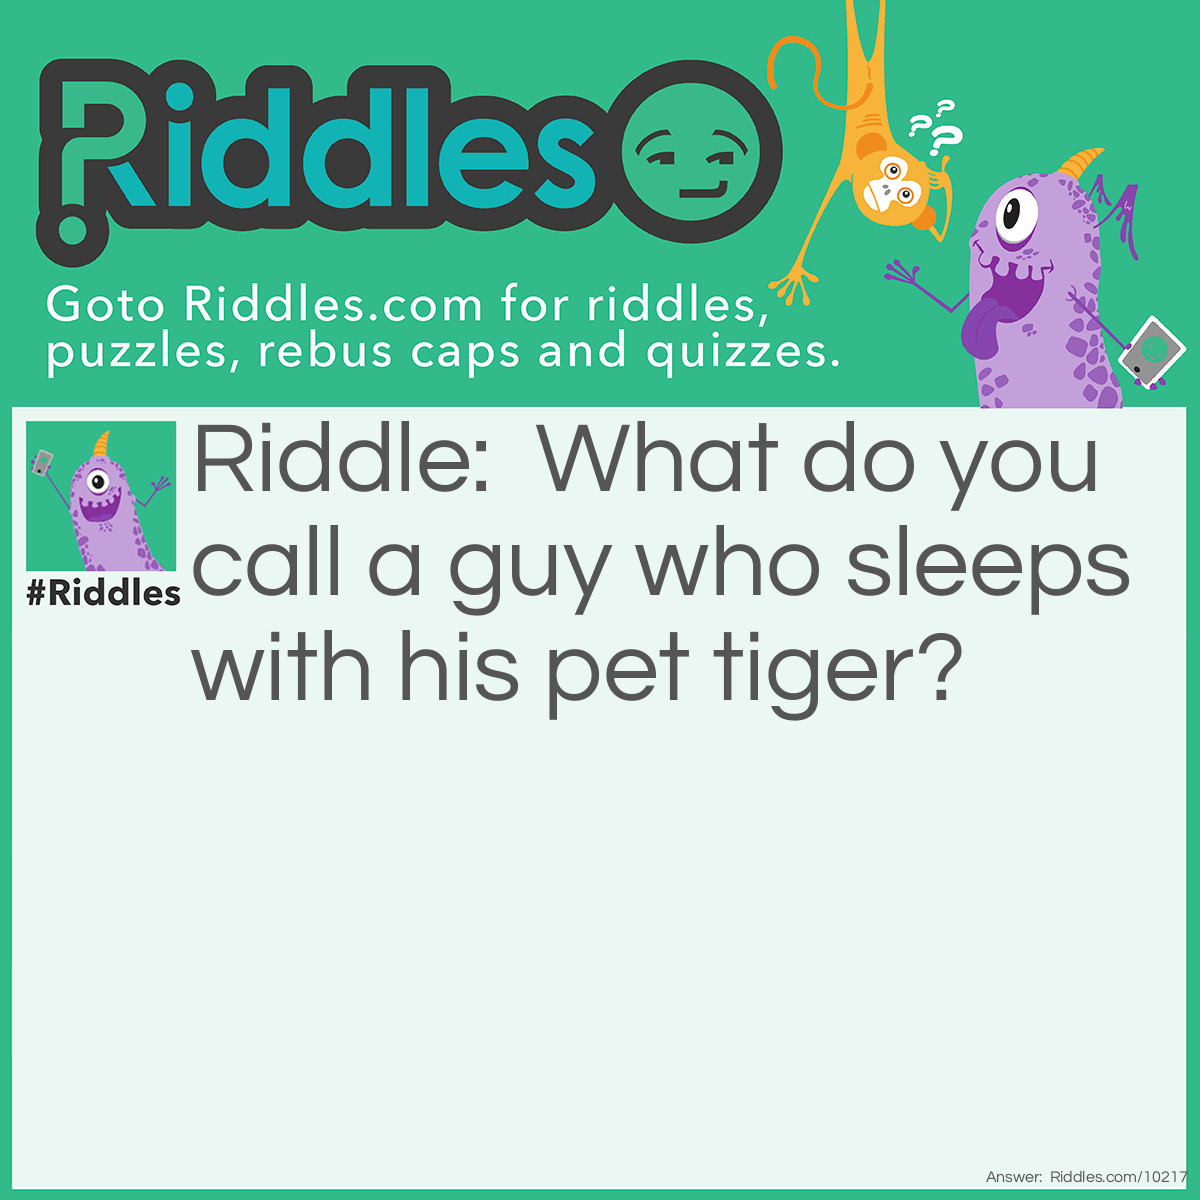 Riddle: What do you call a guy who sleeps with his pet tiger? Answer: Claude.